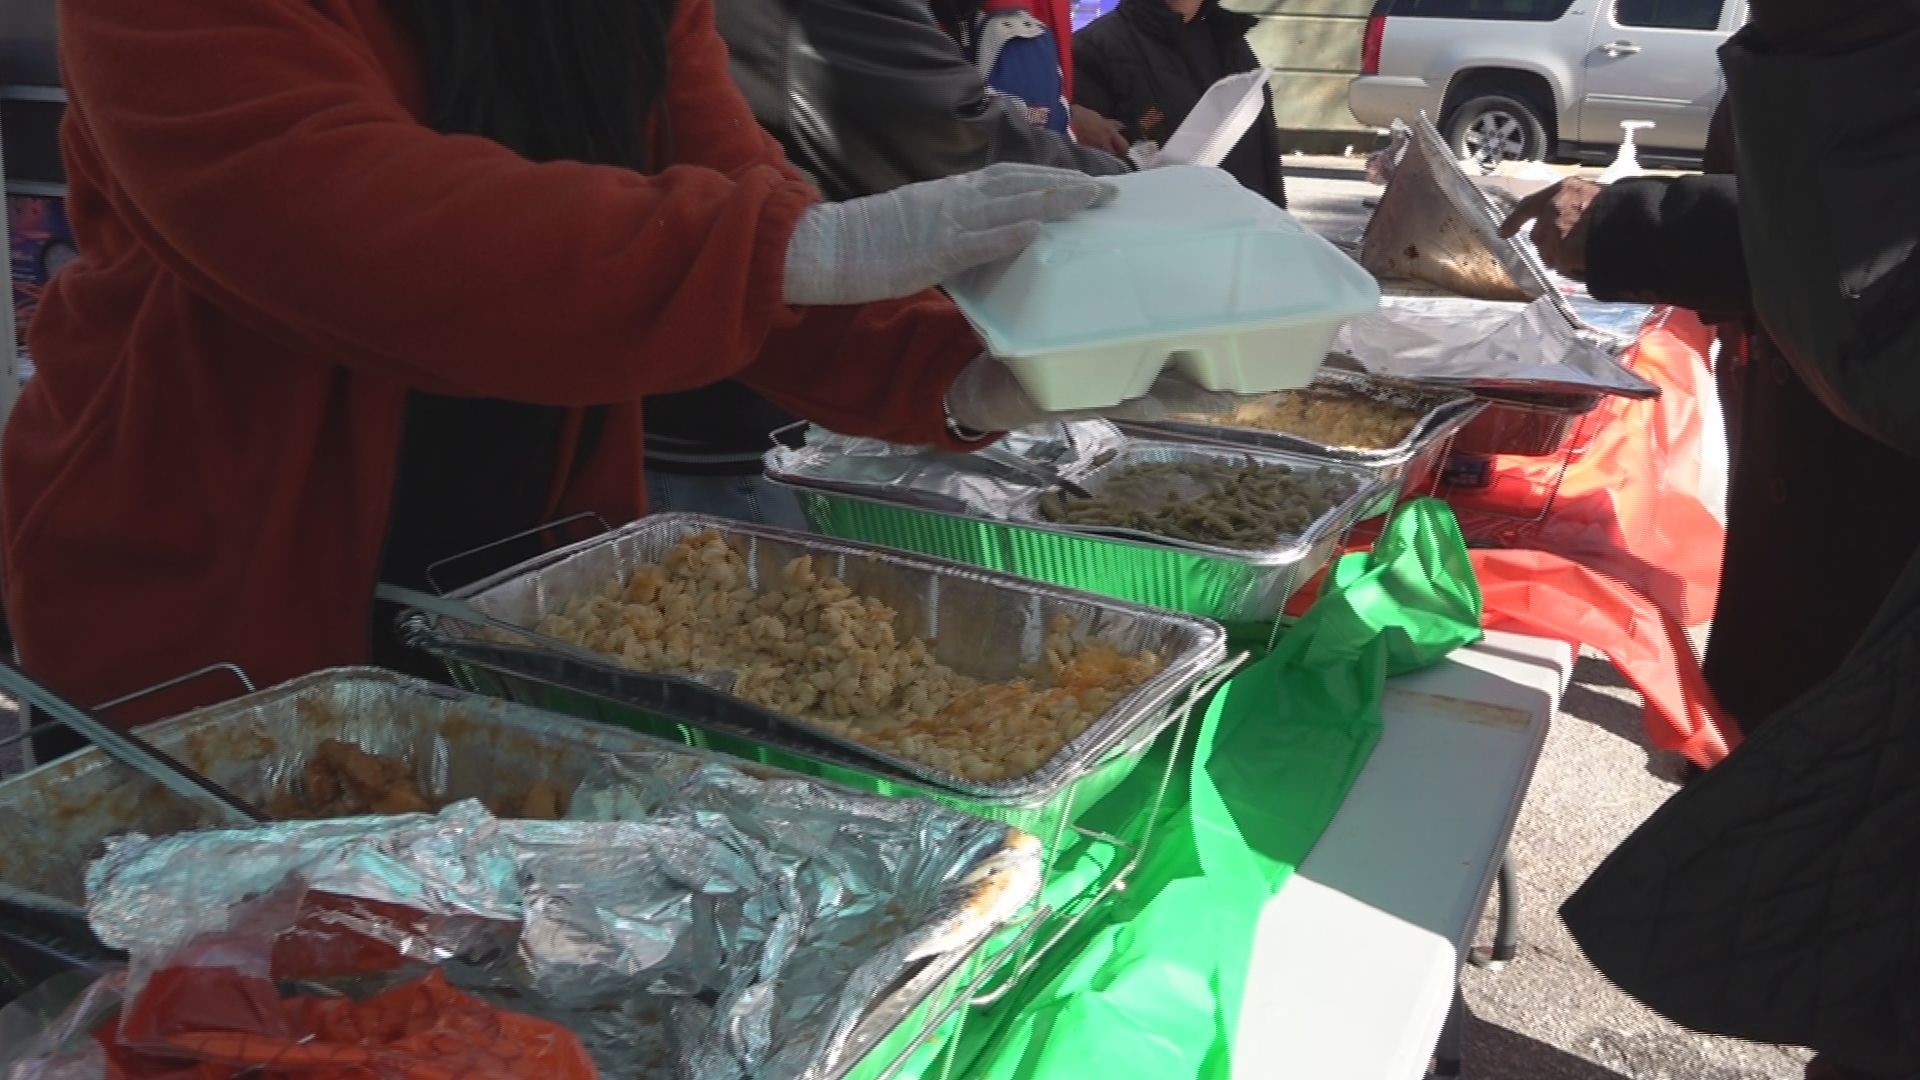 Around 300 meals were served along with bags full of blankets, hats, sanitizer, and more.